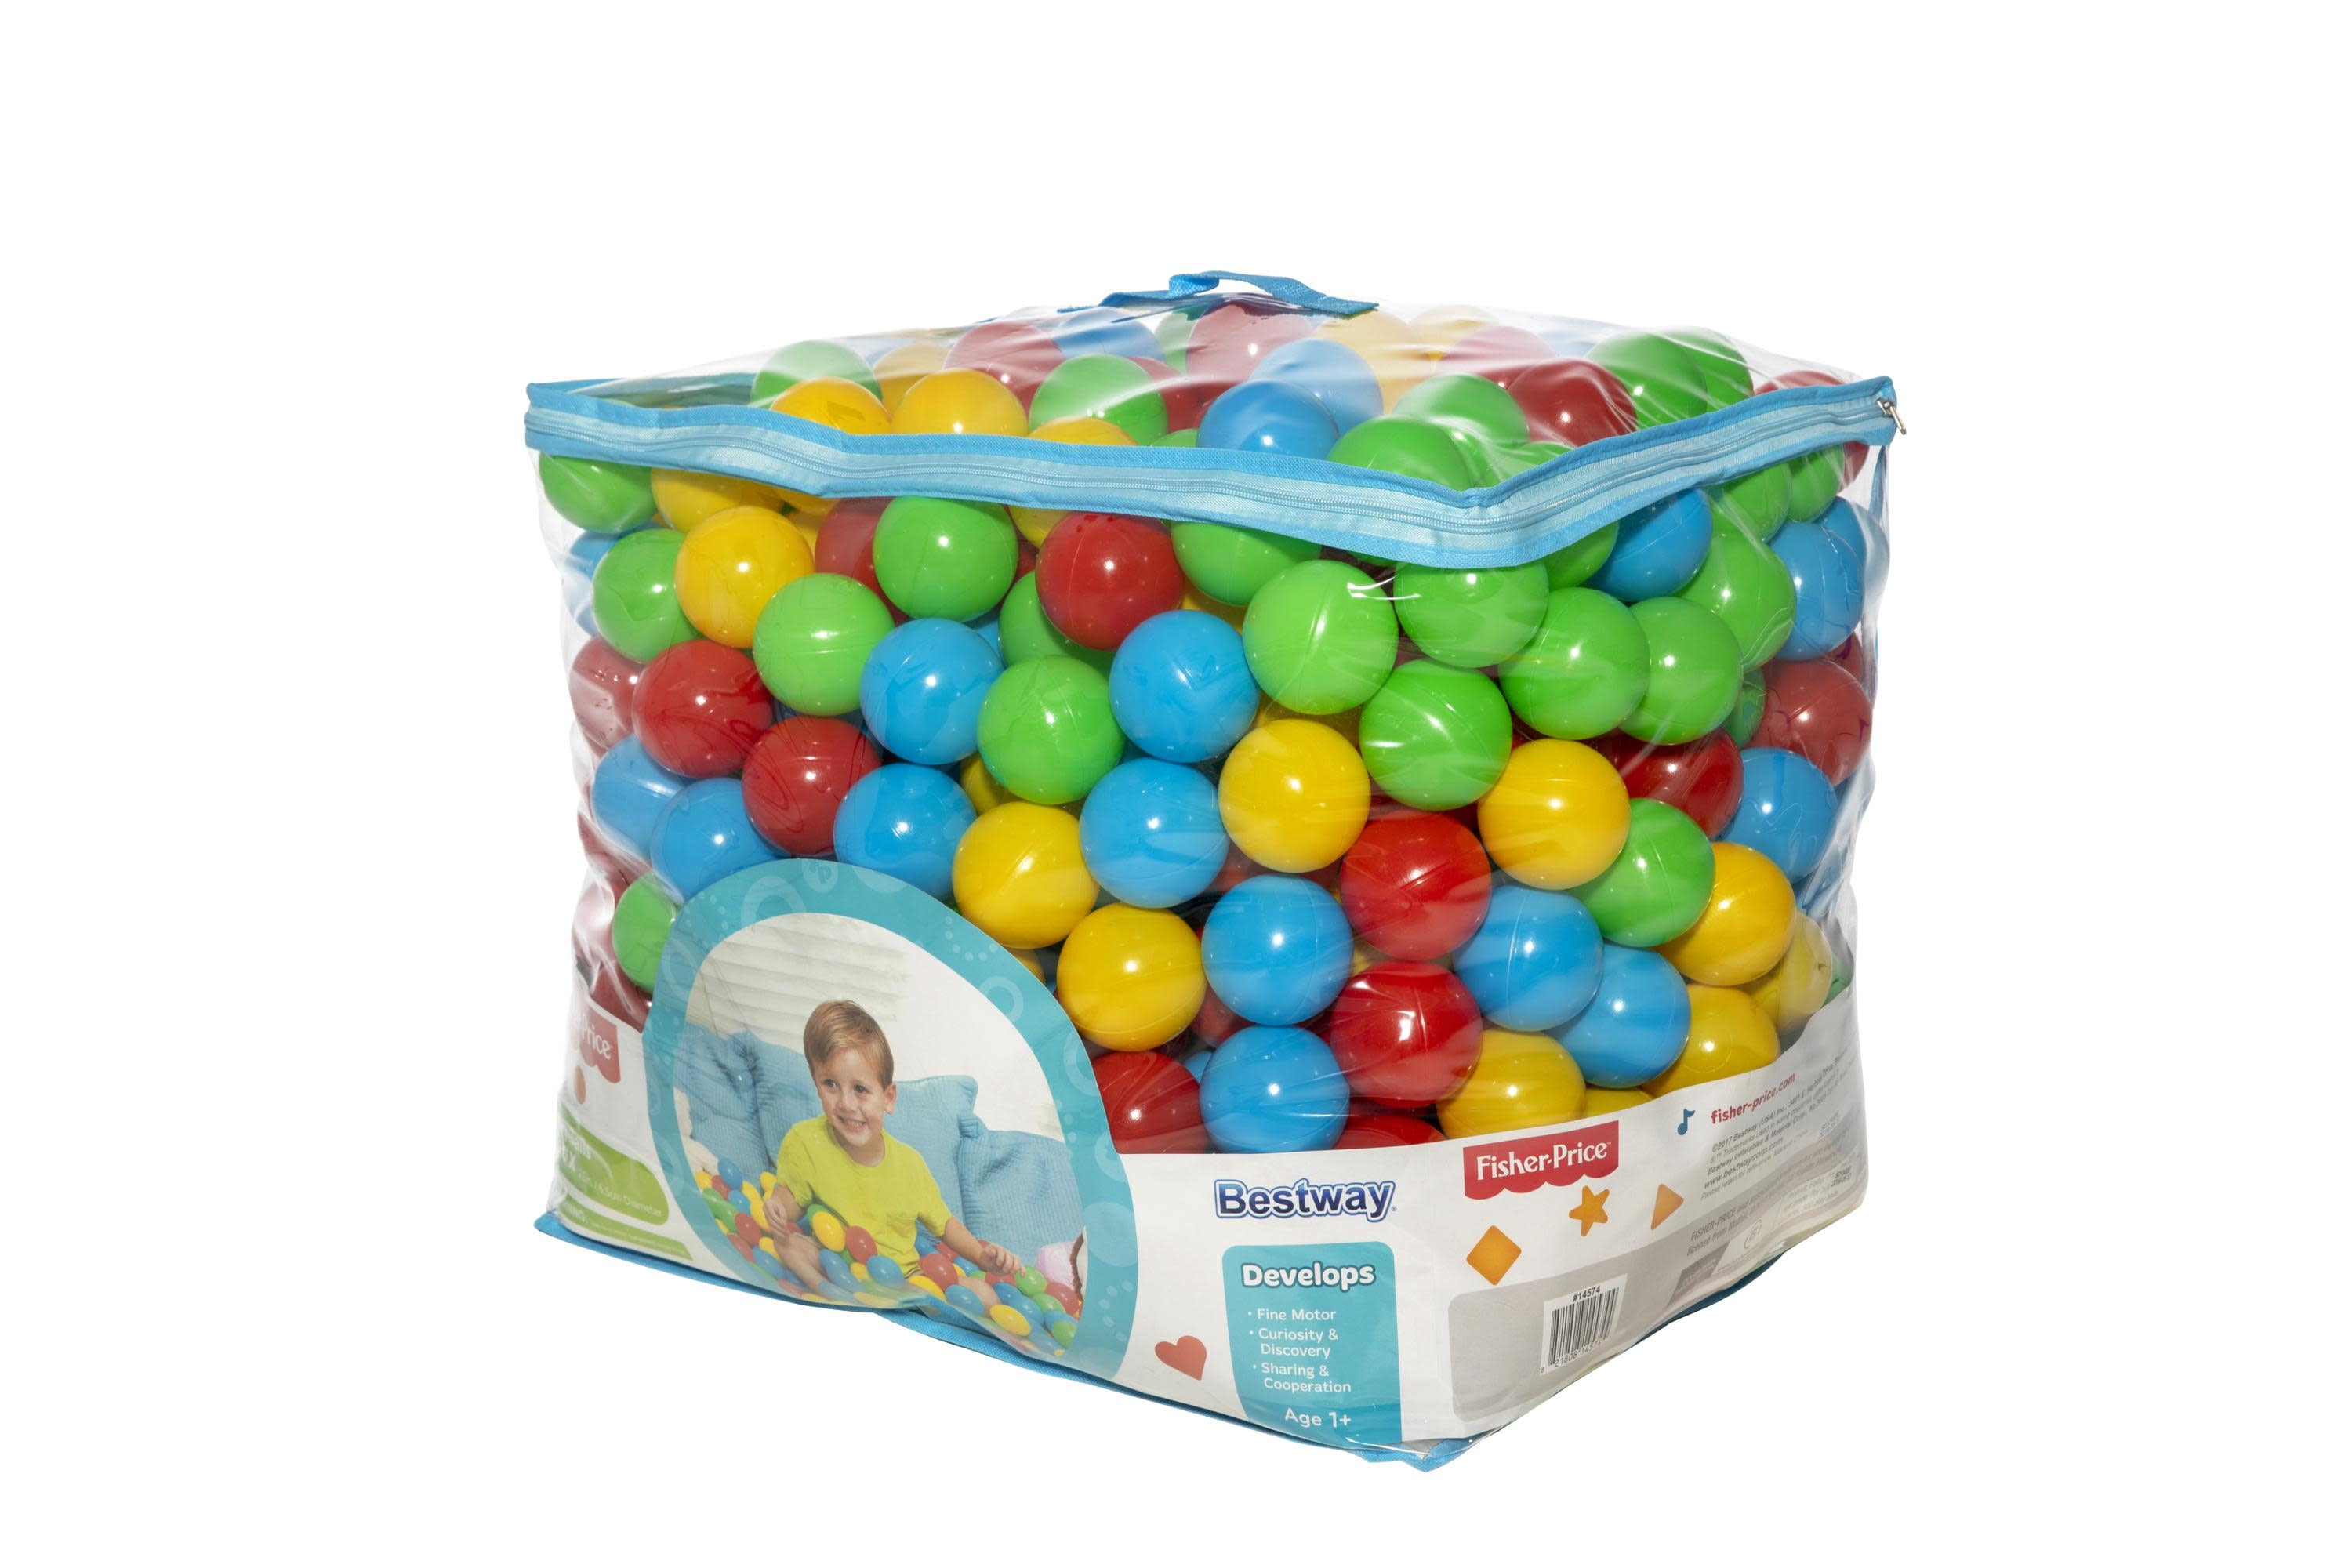 Childrens Factory 500 Mixed Color Balls Multi